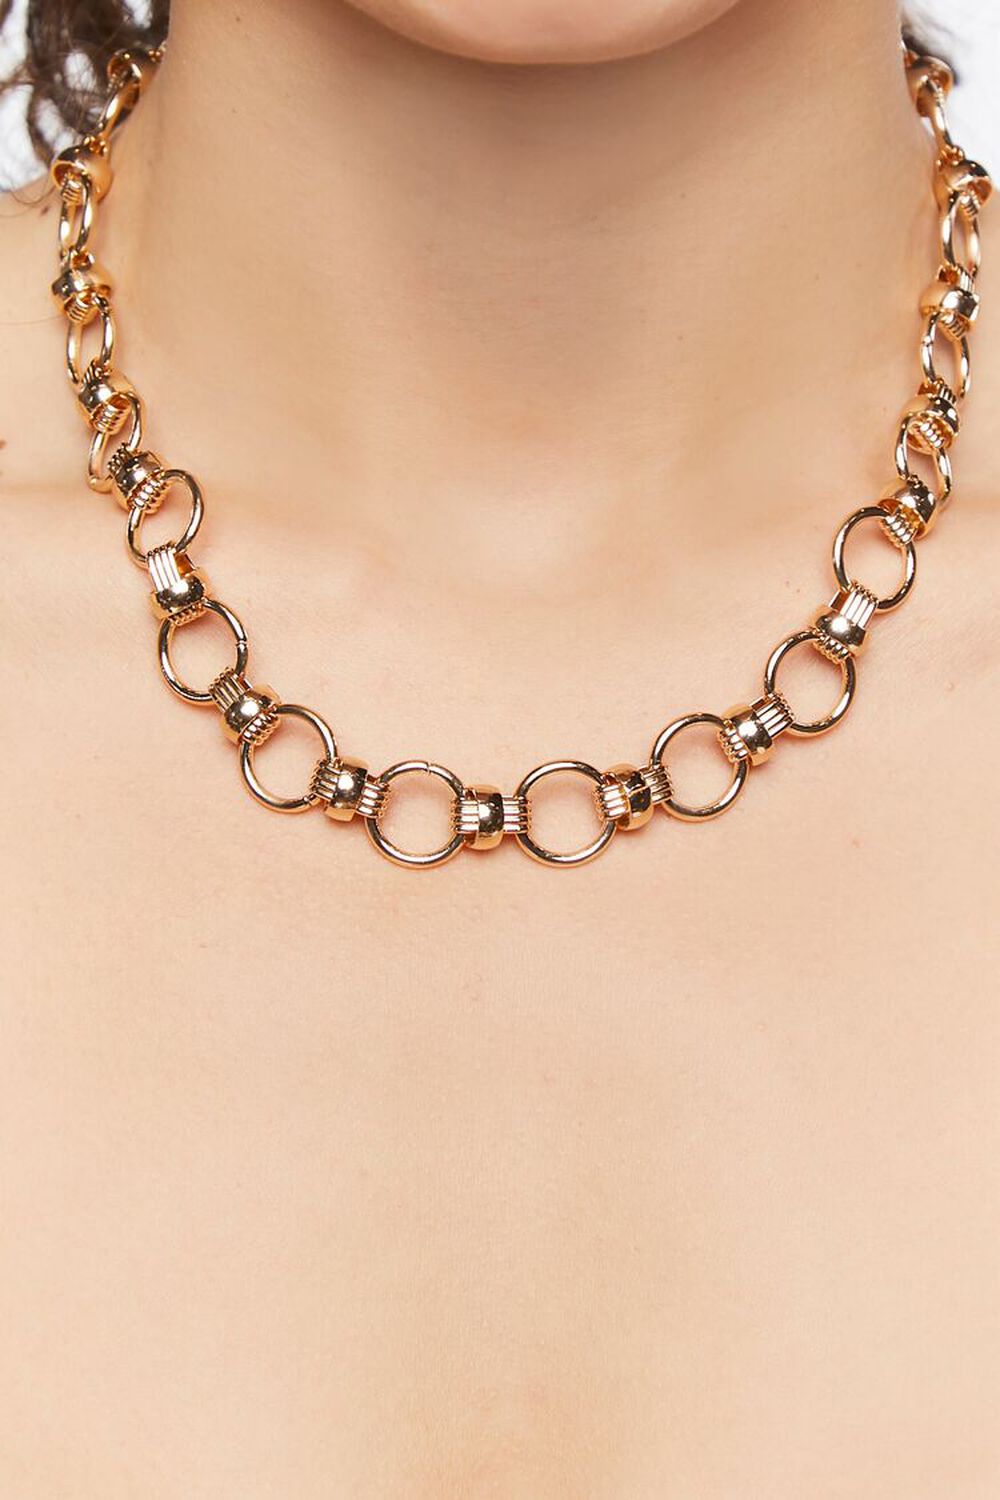 GOLD Chunky Circle Chain Necklace, image 1